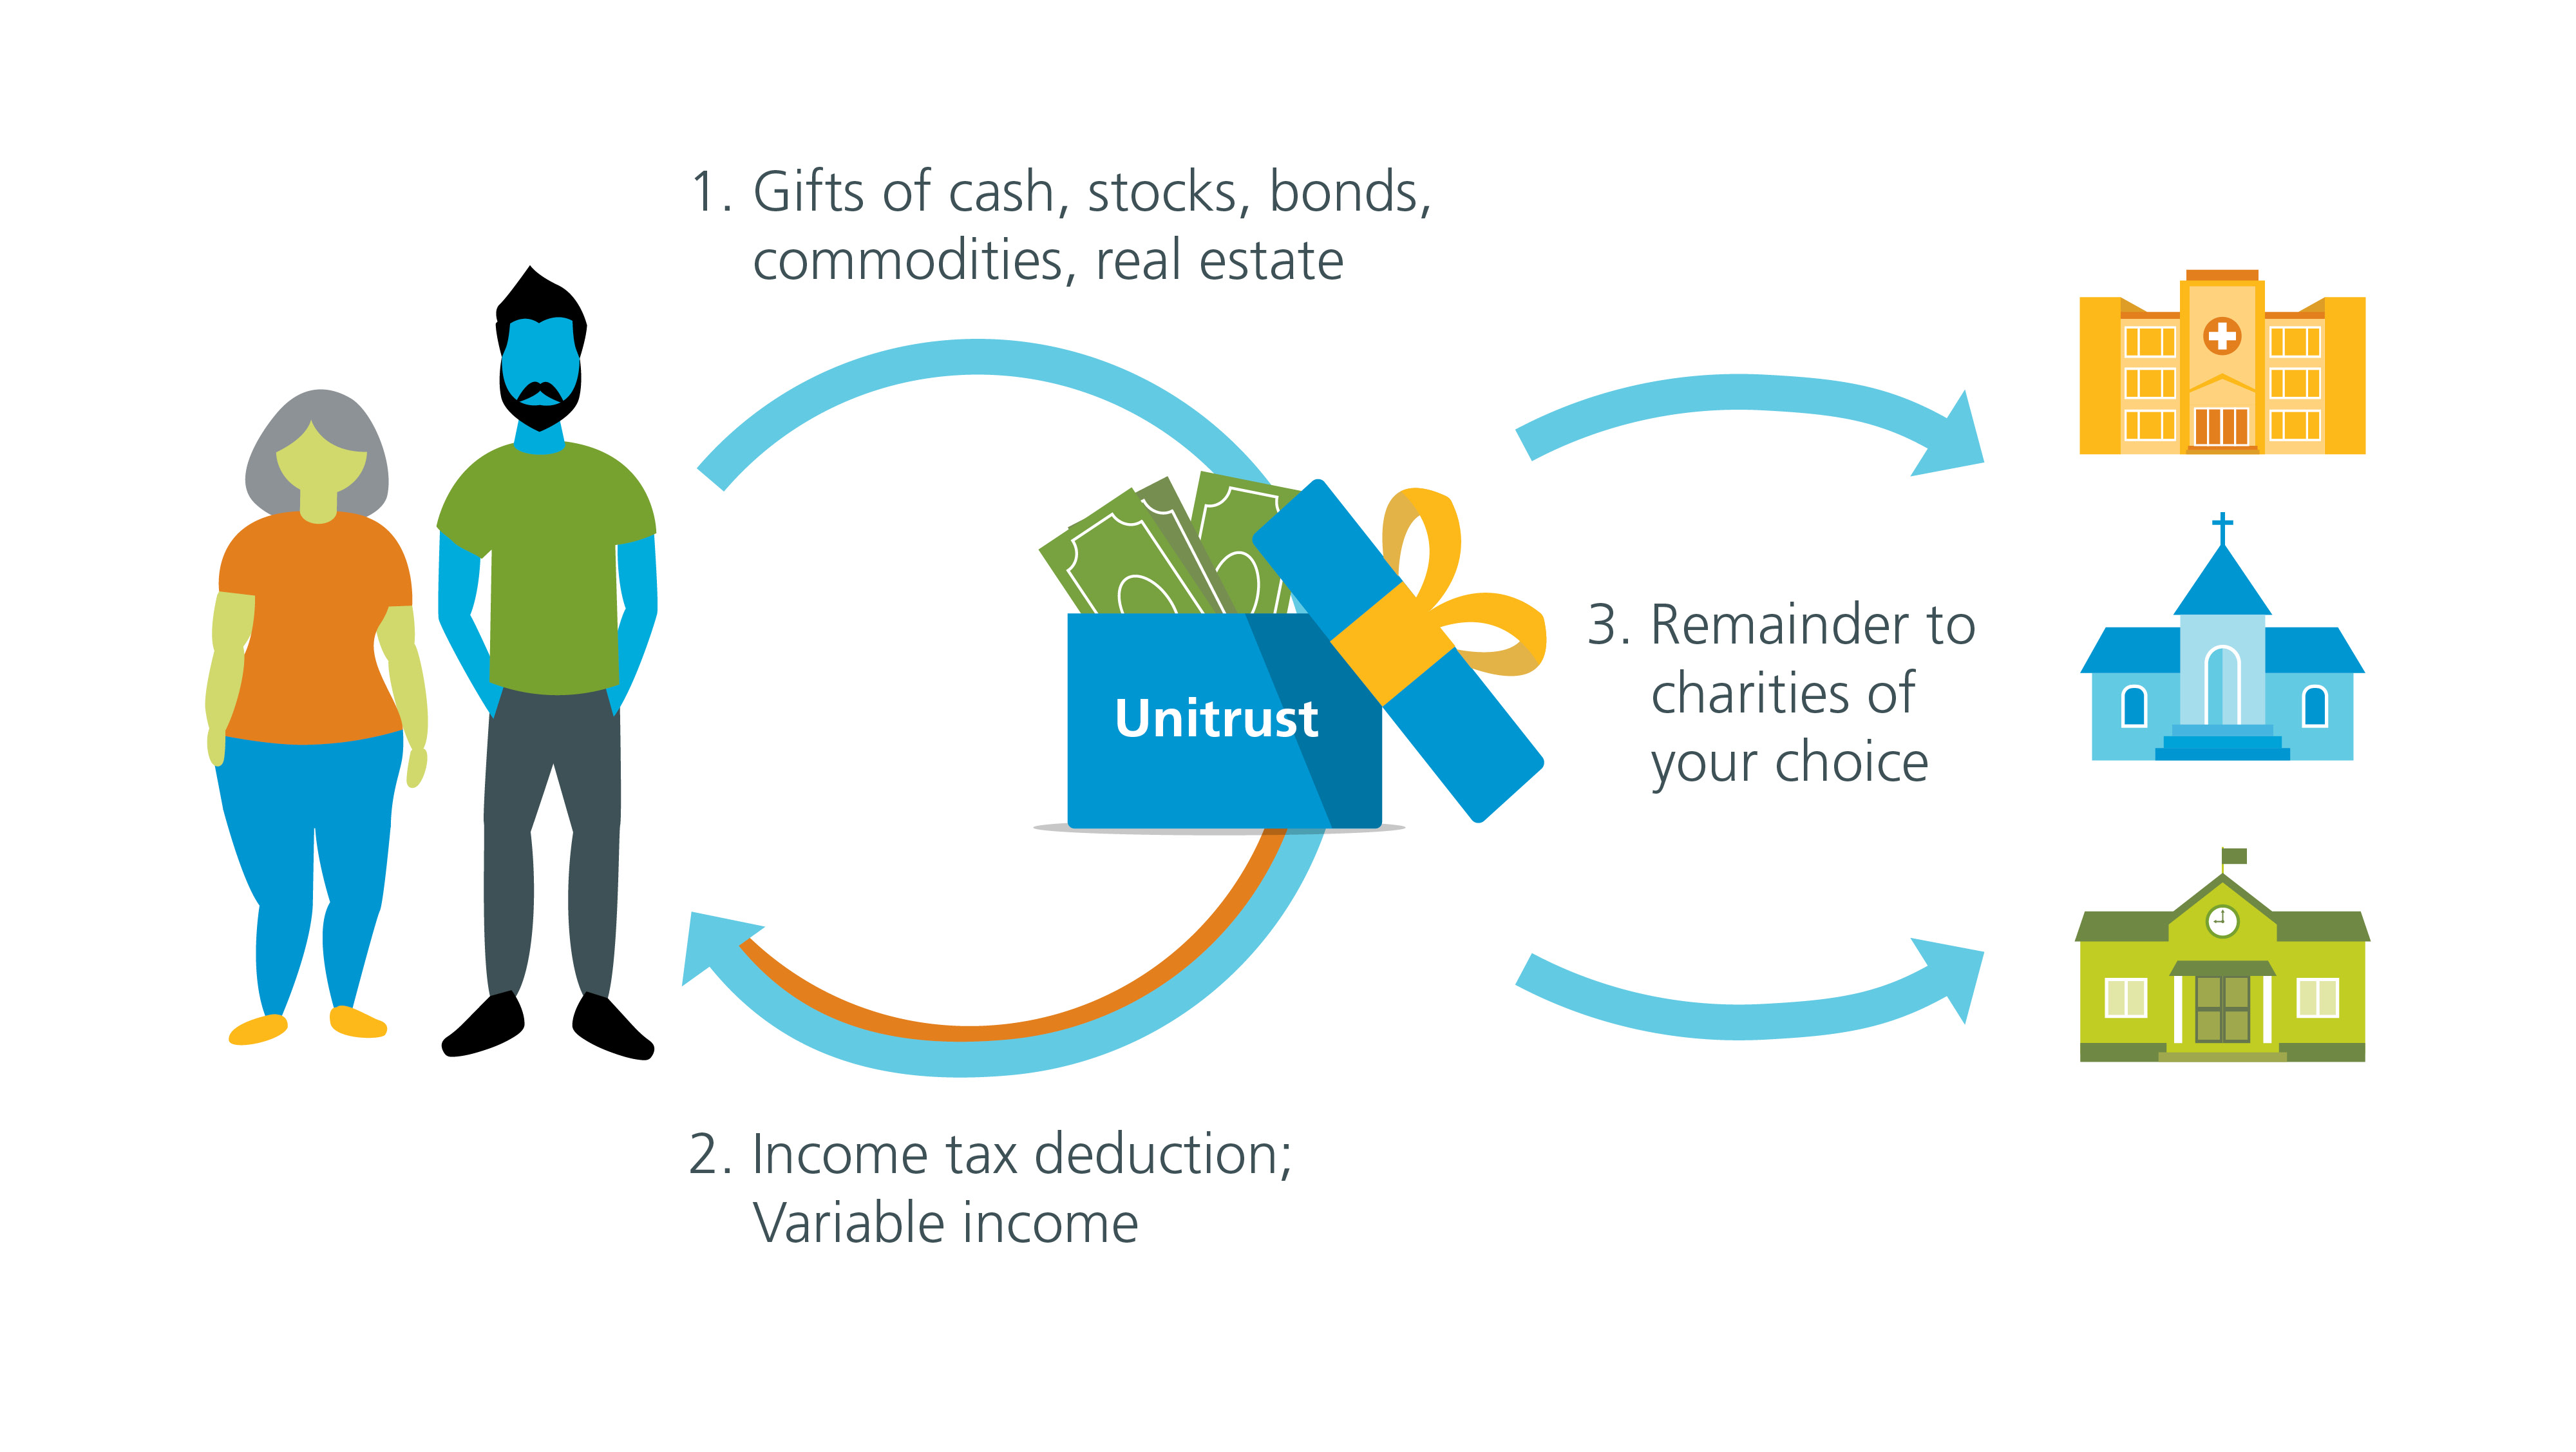 Charitable lead trust graph from assets, income tax deduction, remainder of funds to charity of choice,